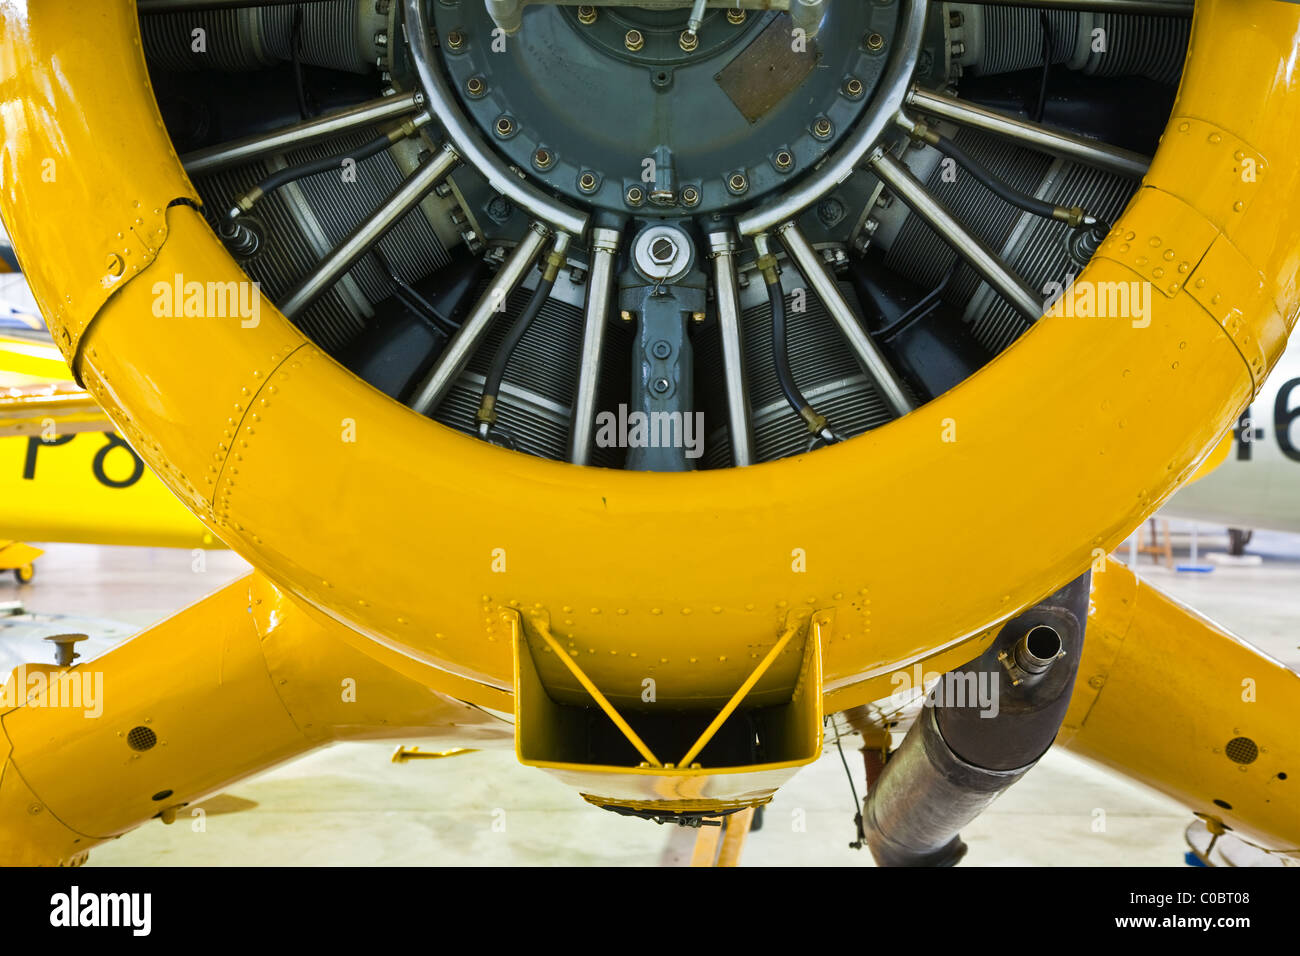 Radial engine and nacelle of a Noorduyn Norseman aircraft Stock Photo